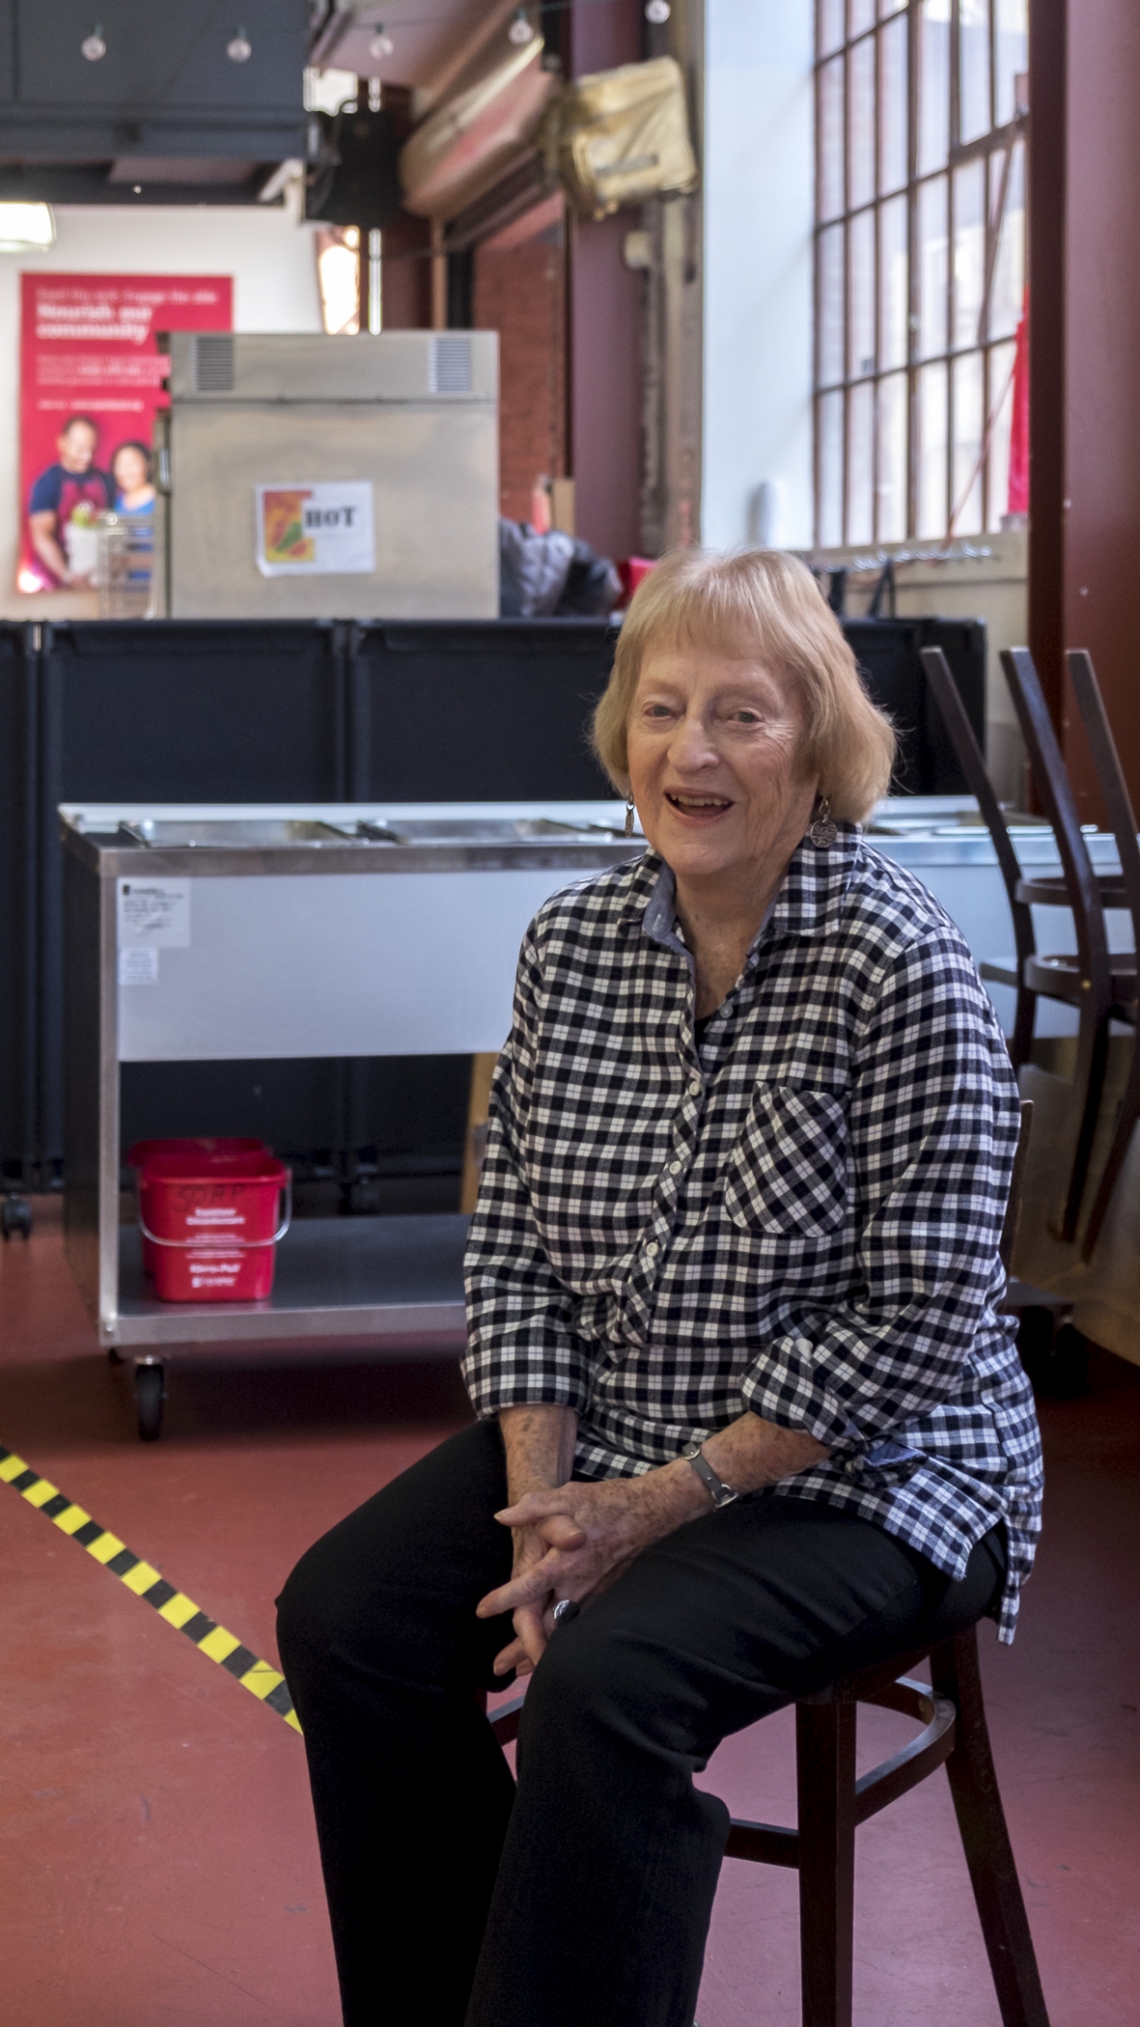 Barbara Strong has volunteered with Project Open Hand for nearly 25 years